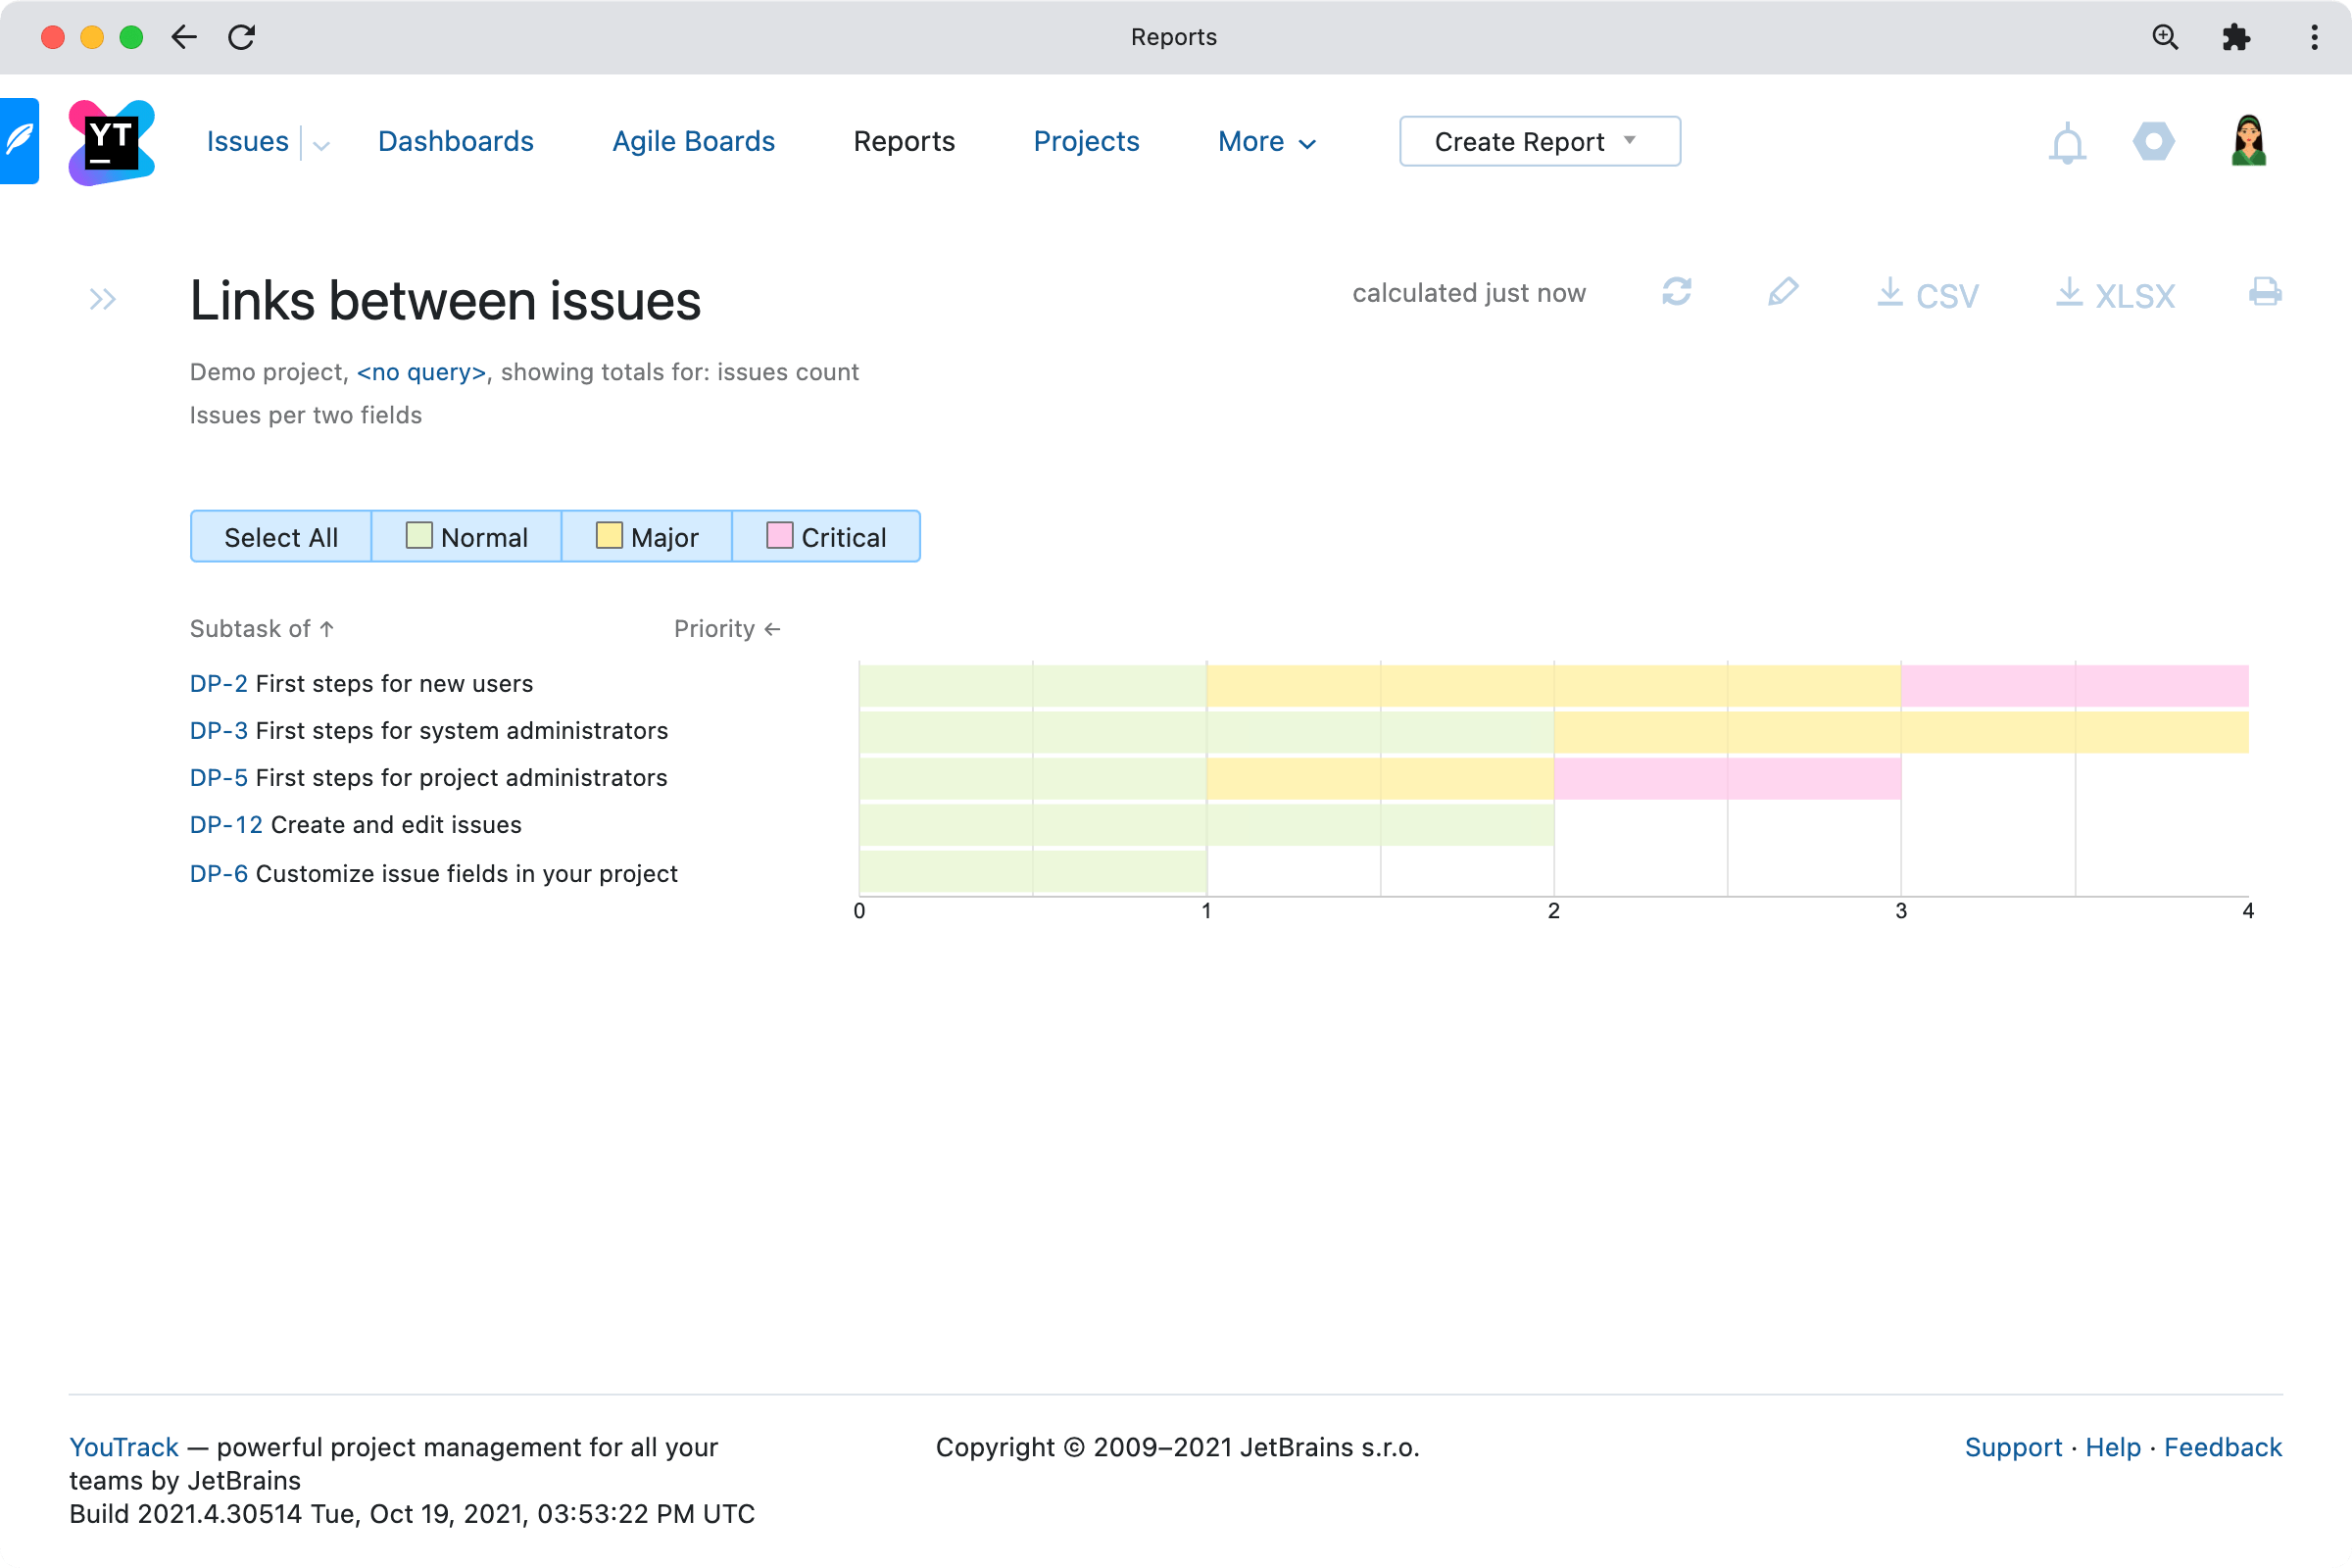 Reports based on links between issues